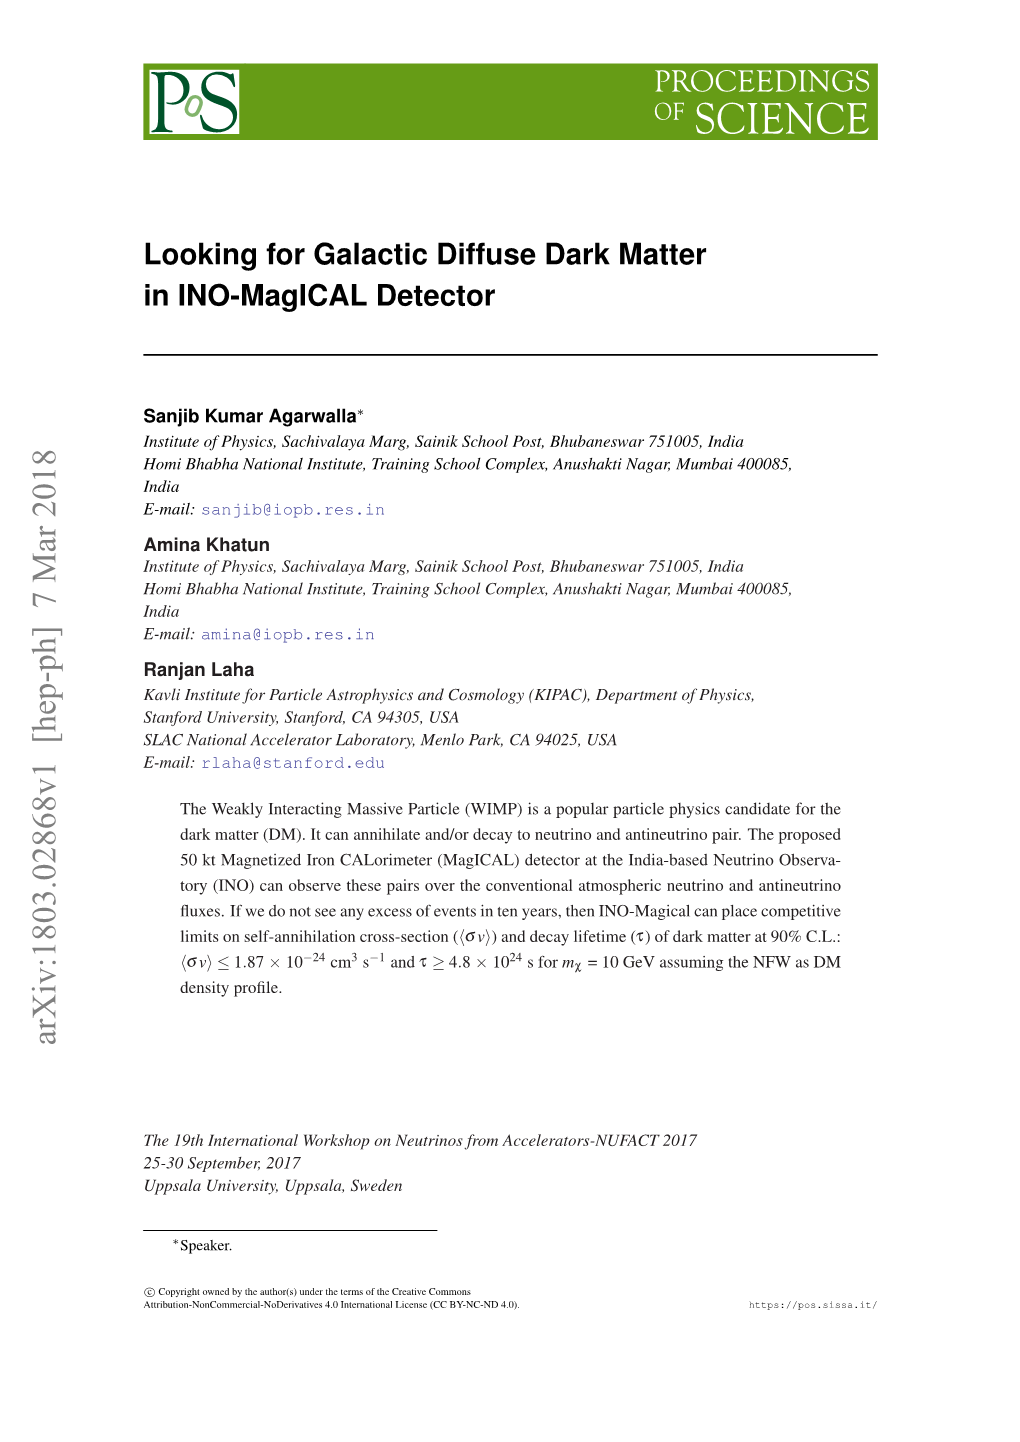 Looking for Galactic Diffuse Dark Matter in INO-Magical Detector